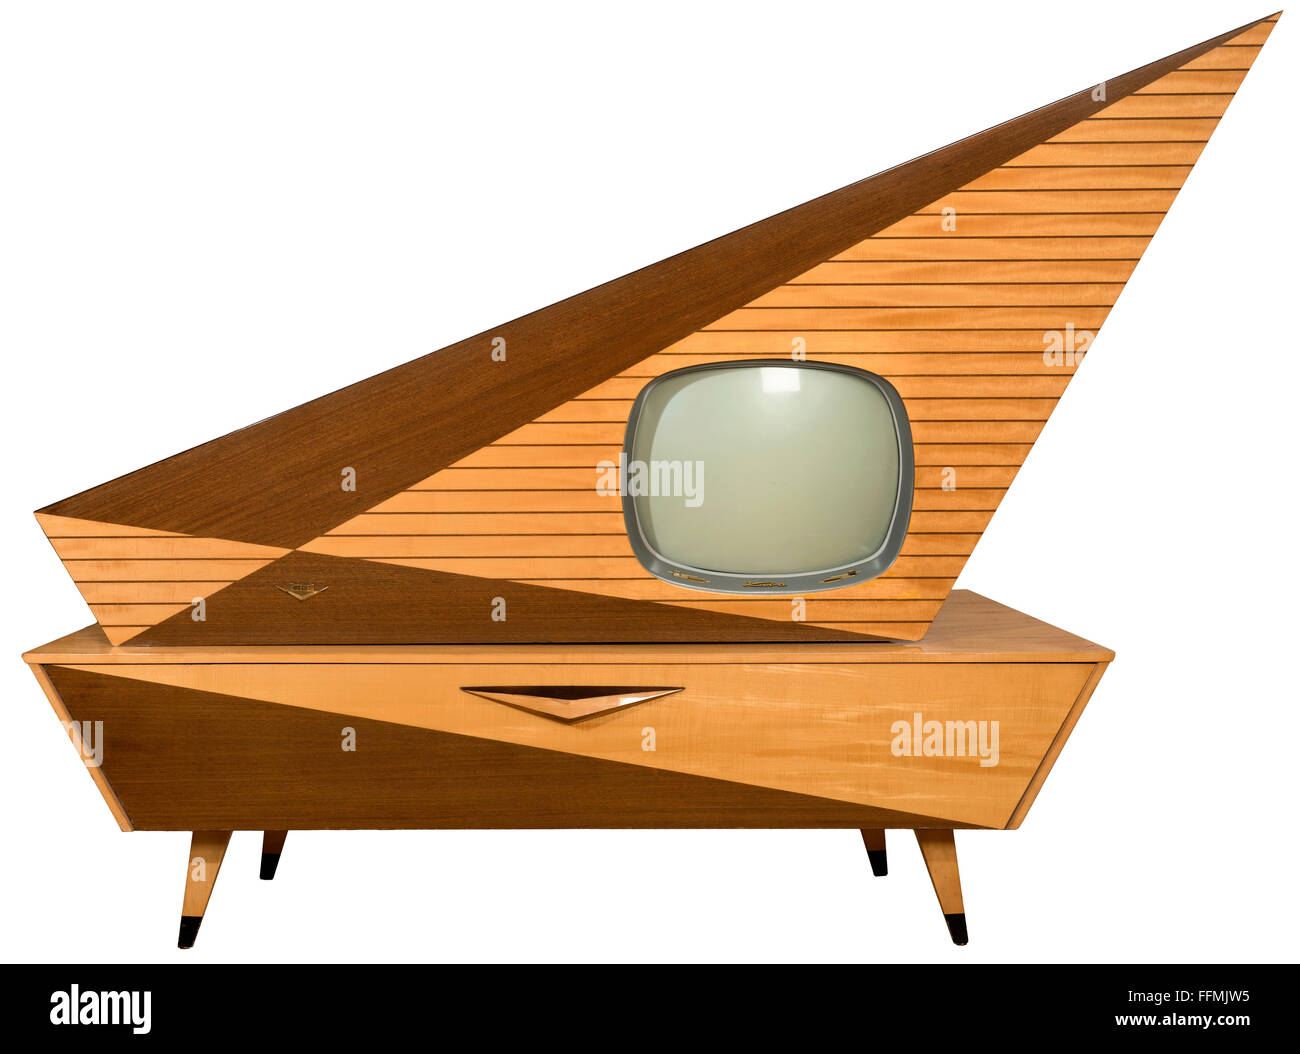 broadcast, television, television set, Kuba Komet, TV luxury cabinet, with integrated television set, screen: 53 centimeter diagonal, upper part pivoted, chassis: exotic woods, high-gloss polished, original price 1957: DM 2798.-, plus DM 429.-, for the built-in magnetophone, monochrome television set, made by: Tonmoebelfabrik Cuba, Wolfenbuettel, Germany, 1957, Additional-Rights-Clearences-Not Available Stock Photo